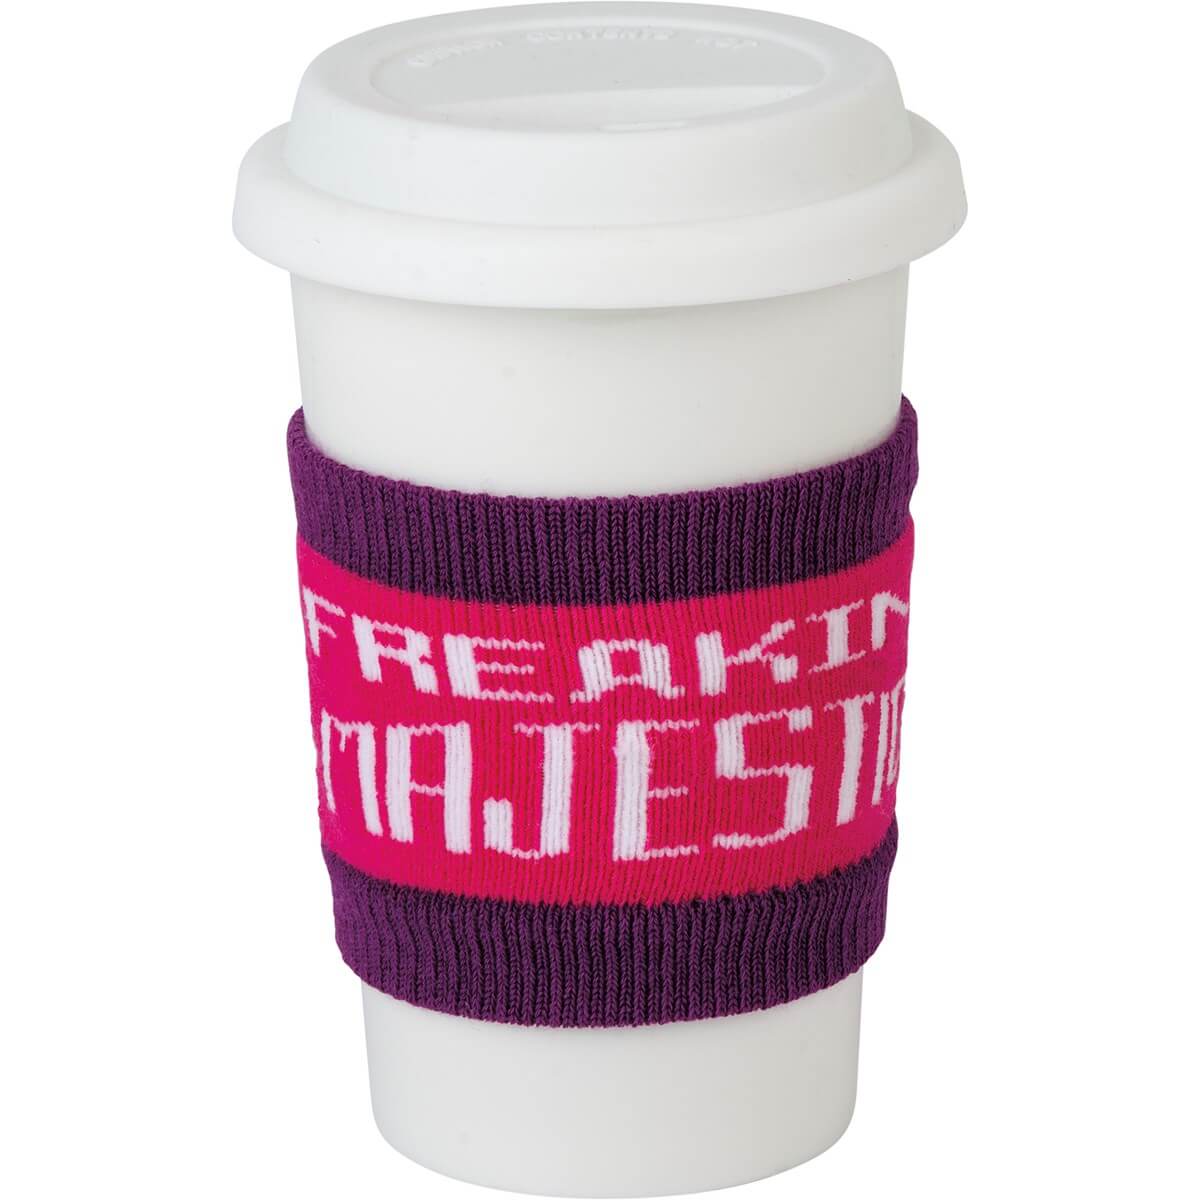 Example of sleeve on coffee cup